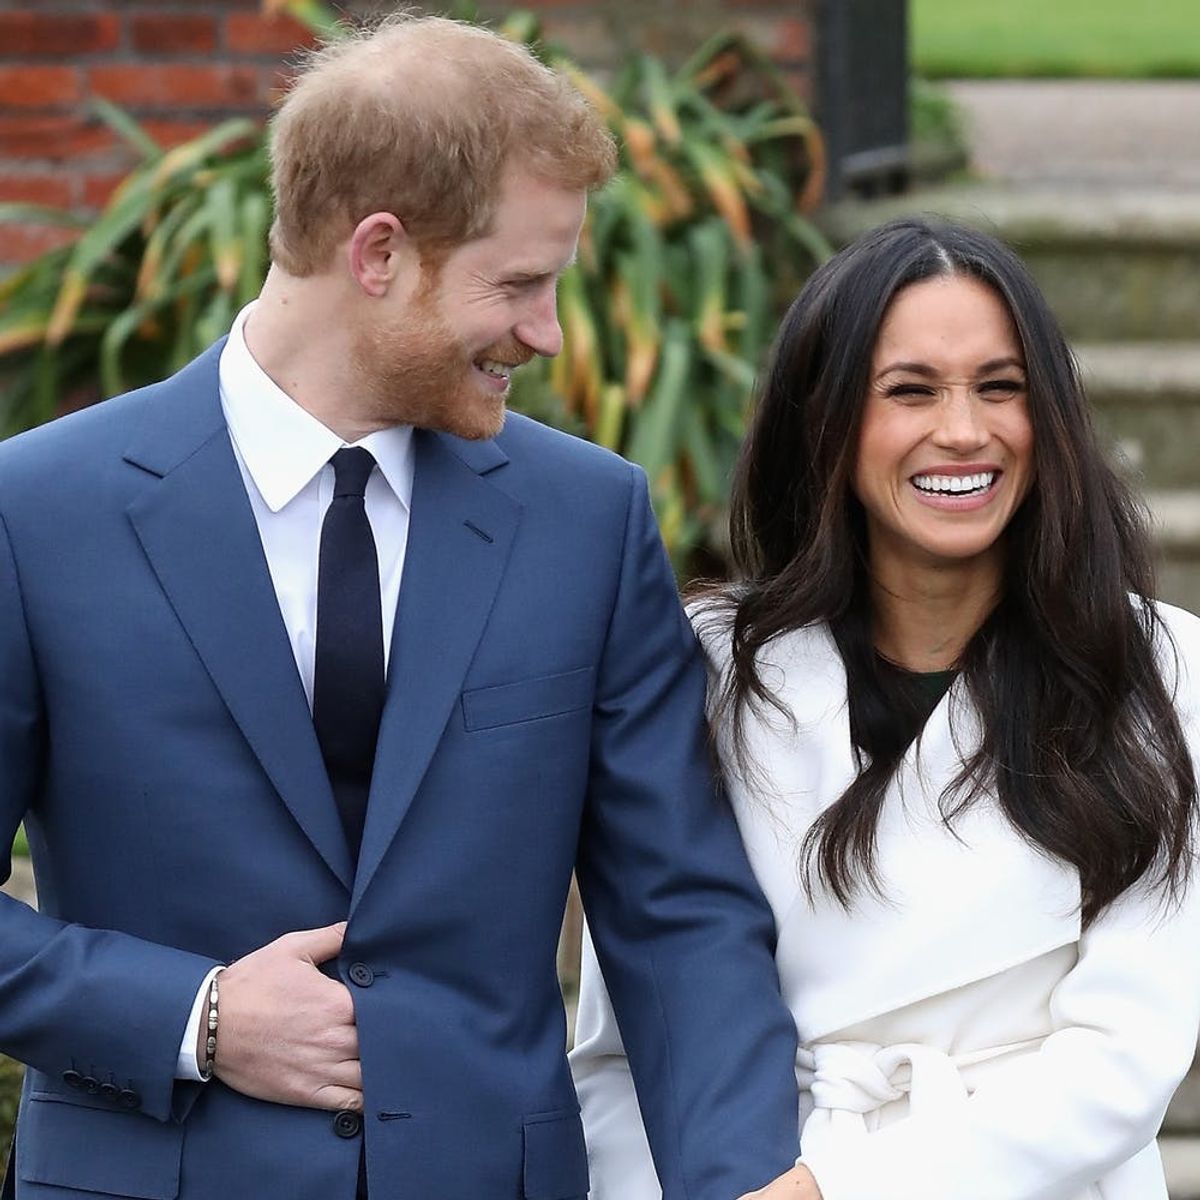 Meet Some of the Lucky (and Inspiring!) People Invited to Prince Harry and Meghan Markle’s Wedding